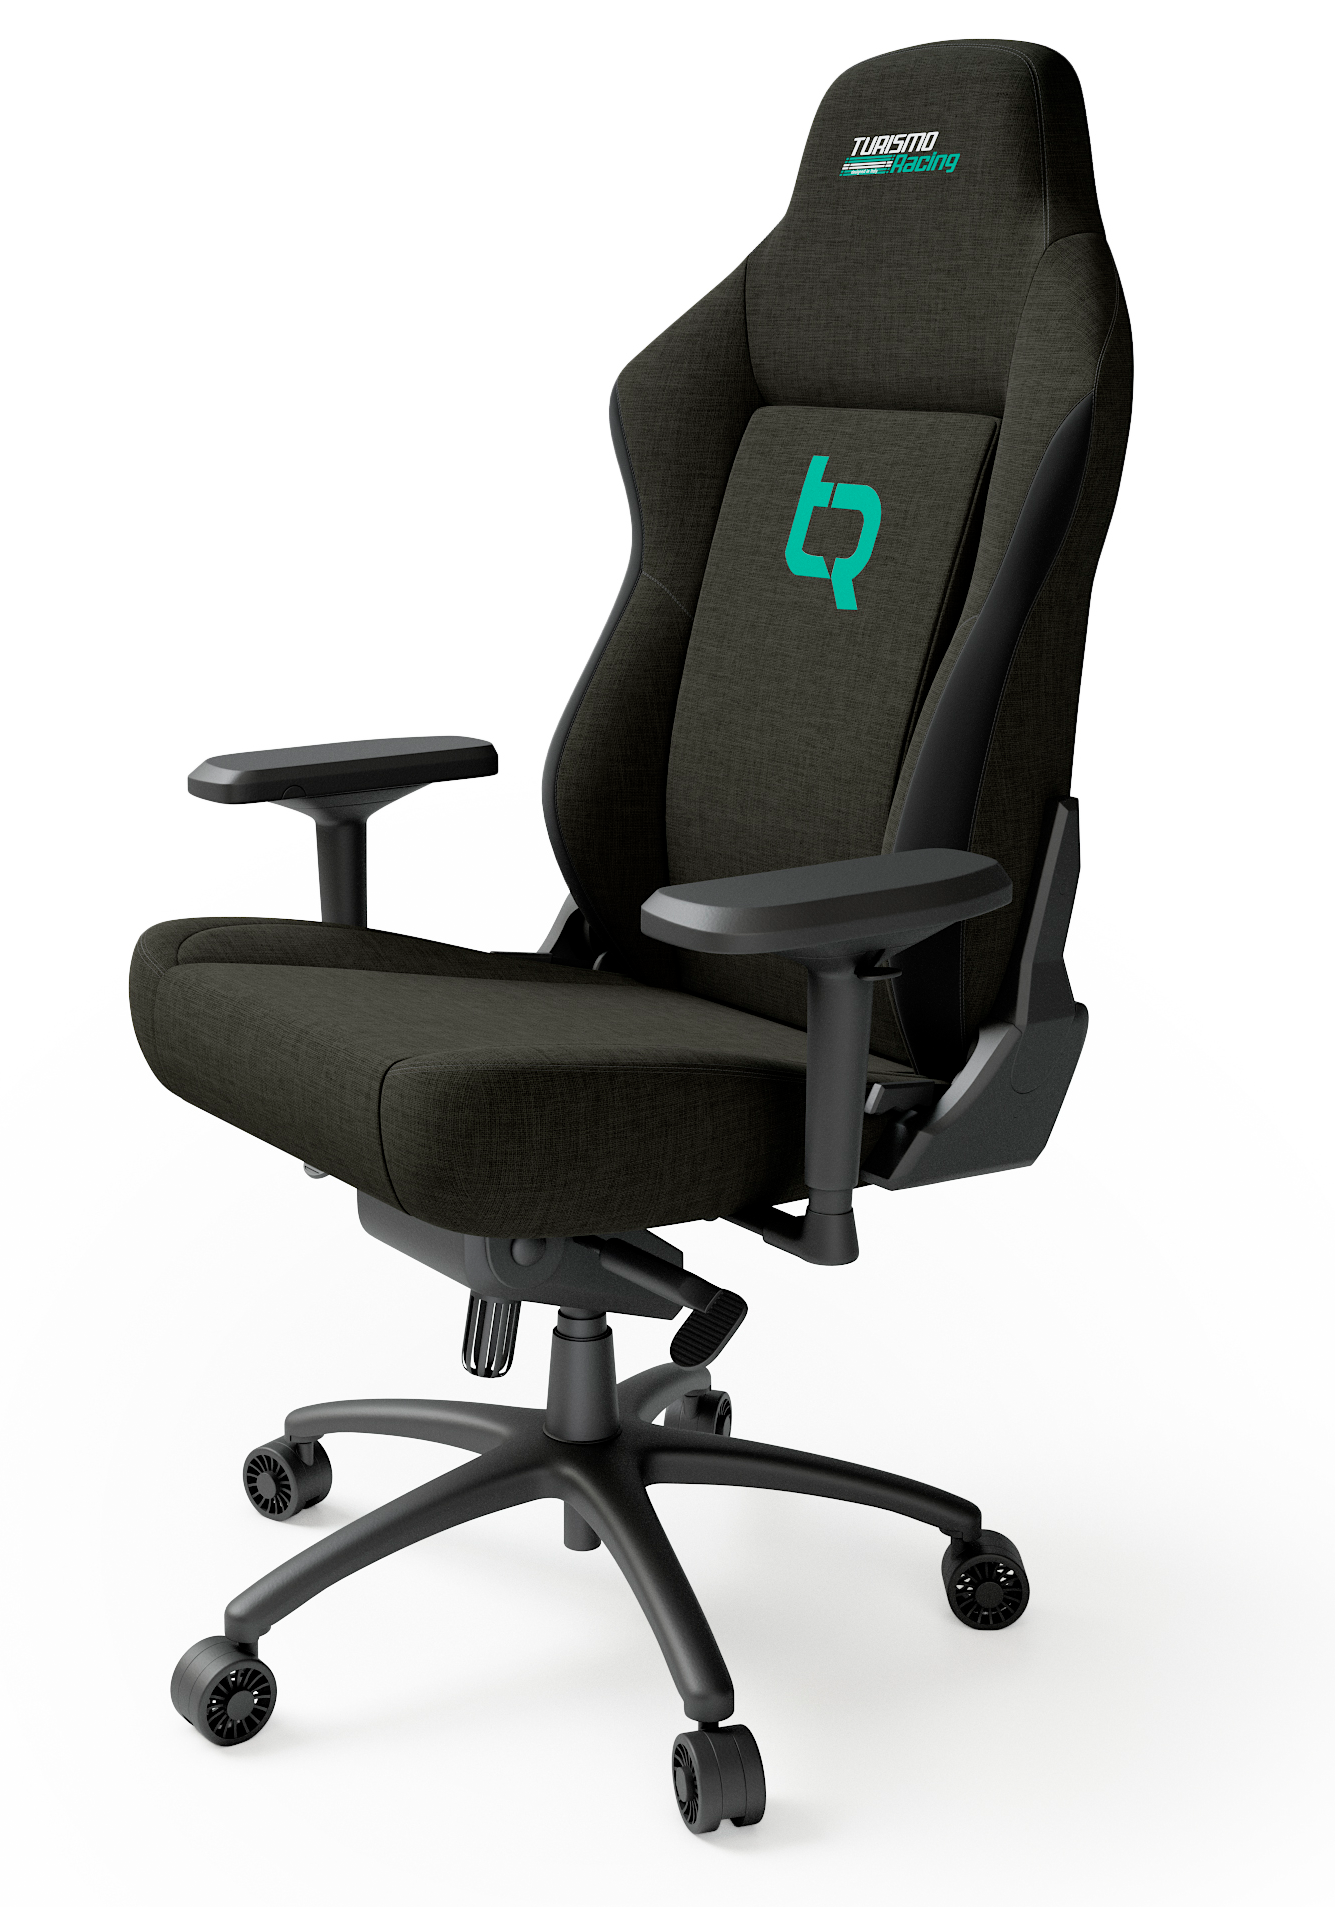 Evoluzione Slate Grey Gaming Chair by Turismo Racing